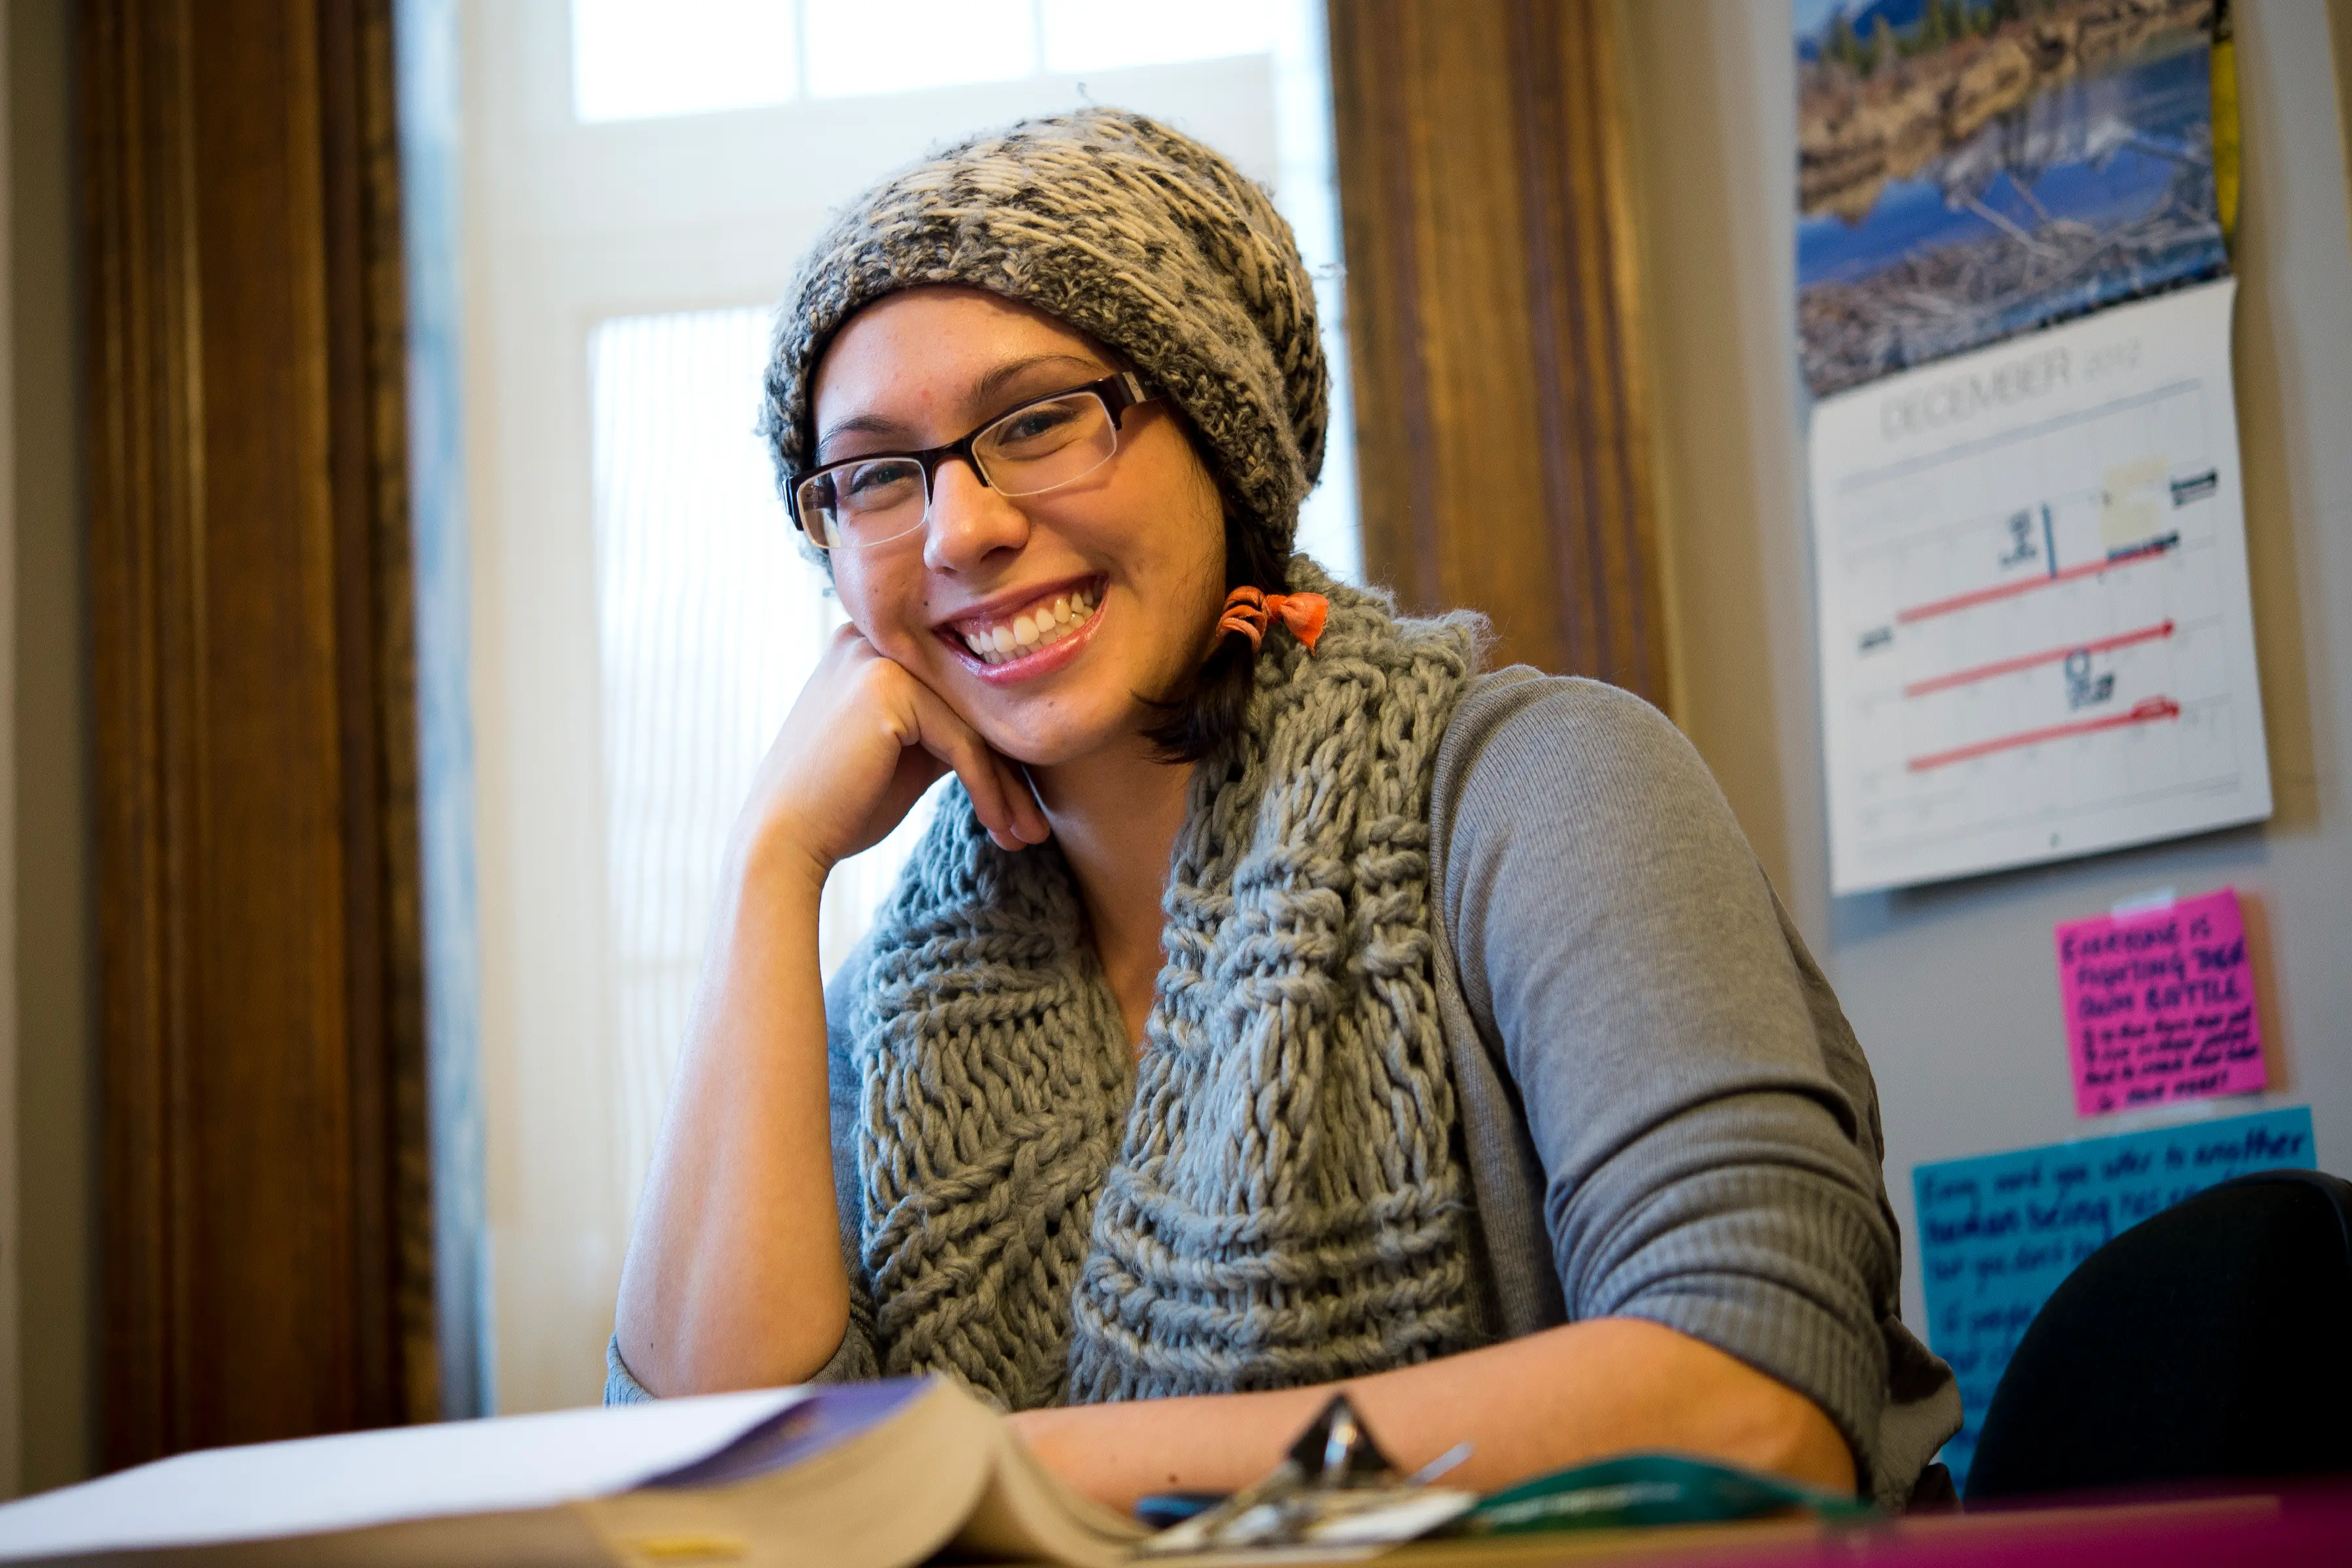 Student with knitted toque and scarf smiling at study desk